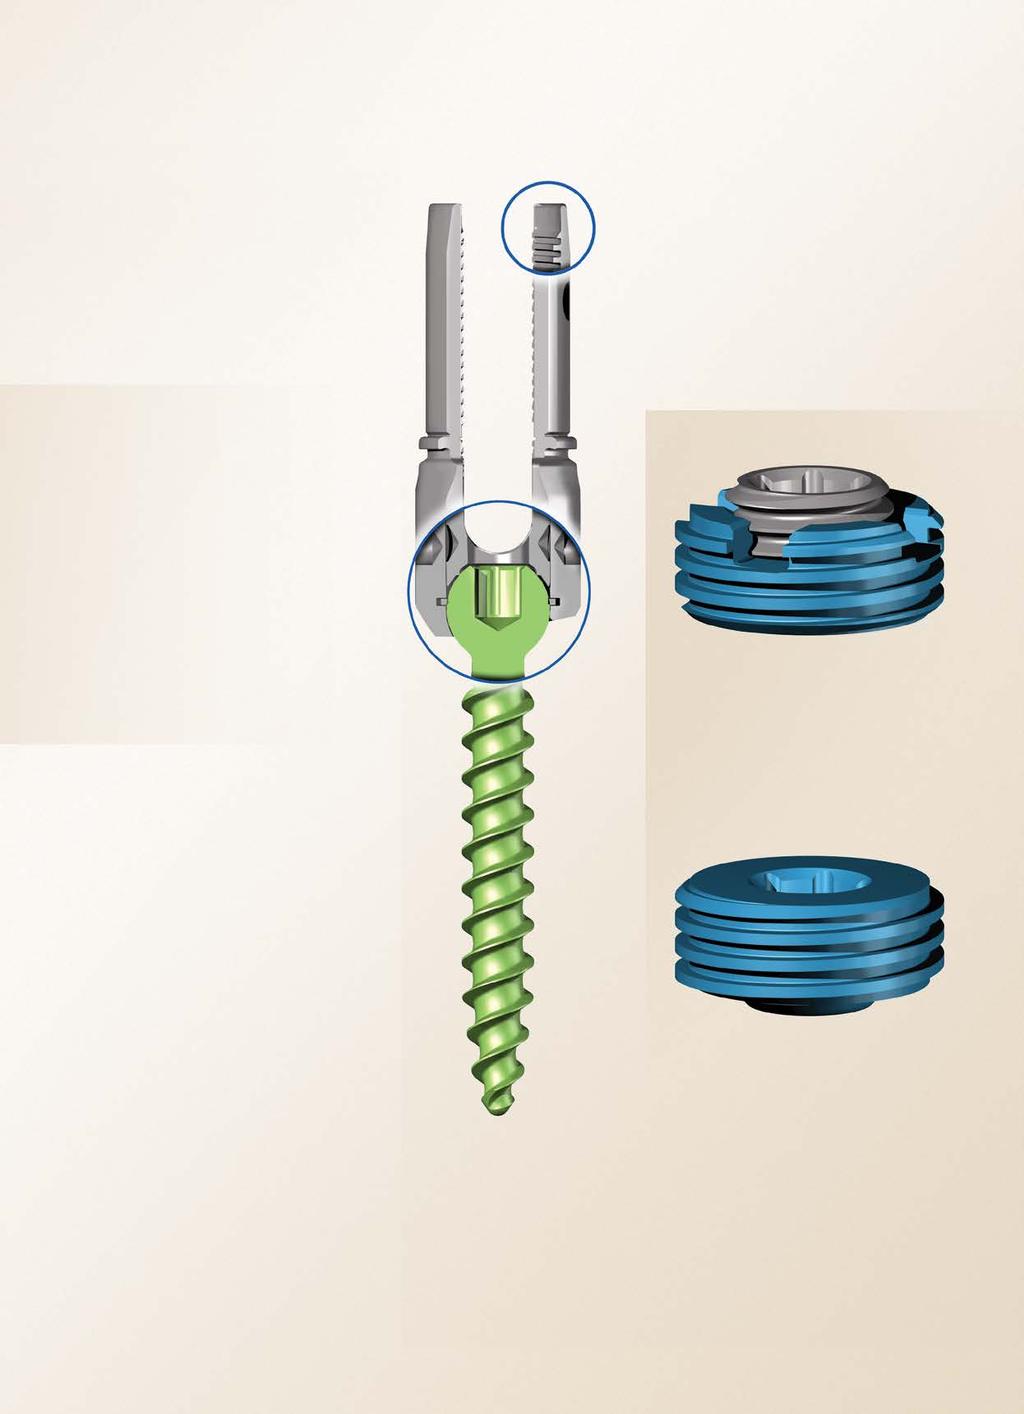 EXPEDIUM VERSE Polyaxial Pedicle Screw TOP NOTCH Feature The Top Notch Feature helps various instruments easily connect to the implant and simplifies intraoperative maneuvers.